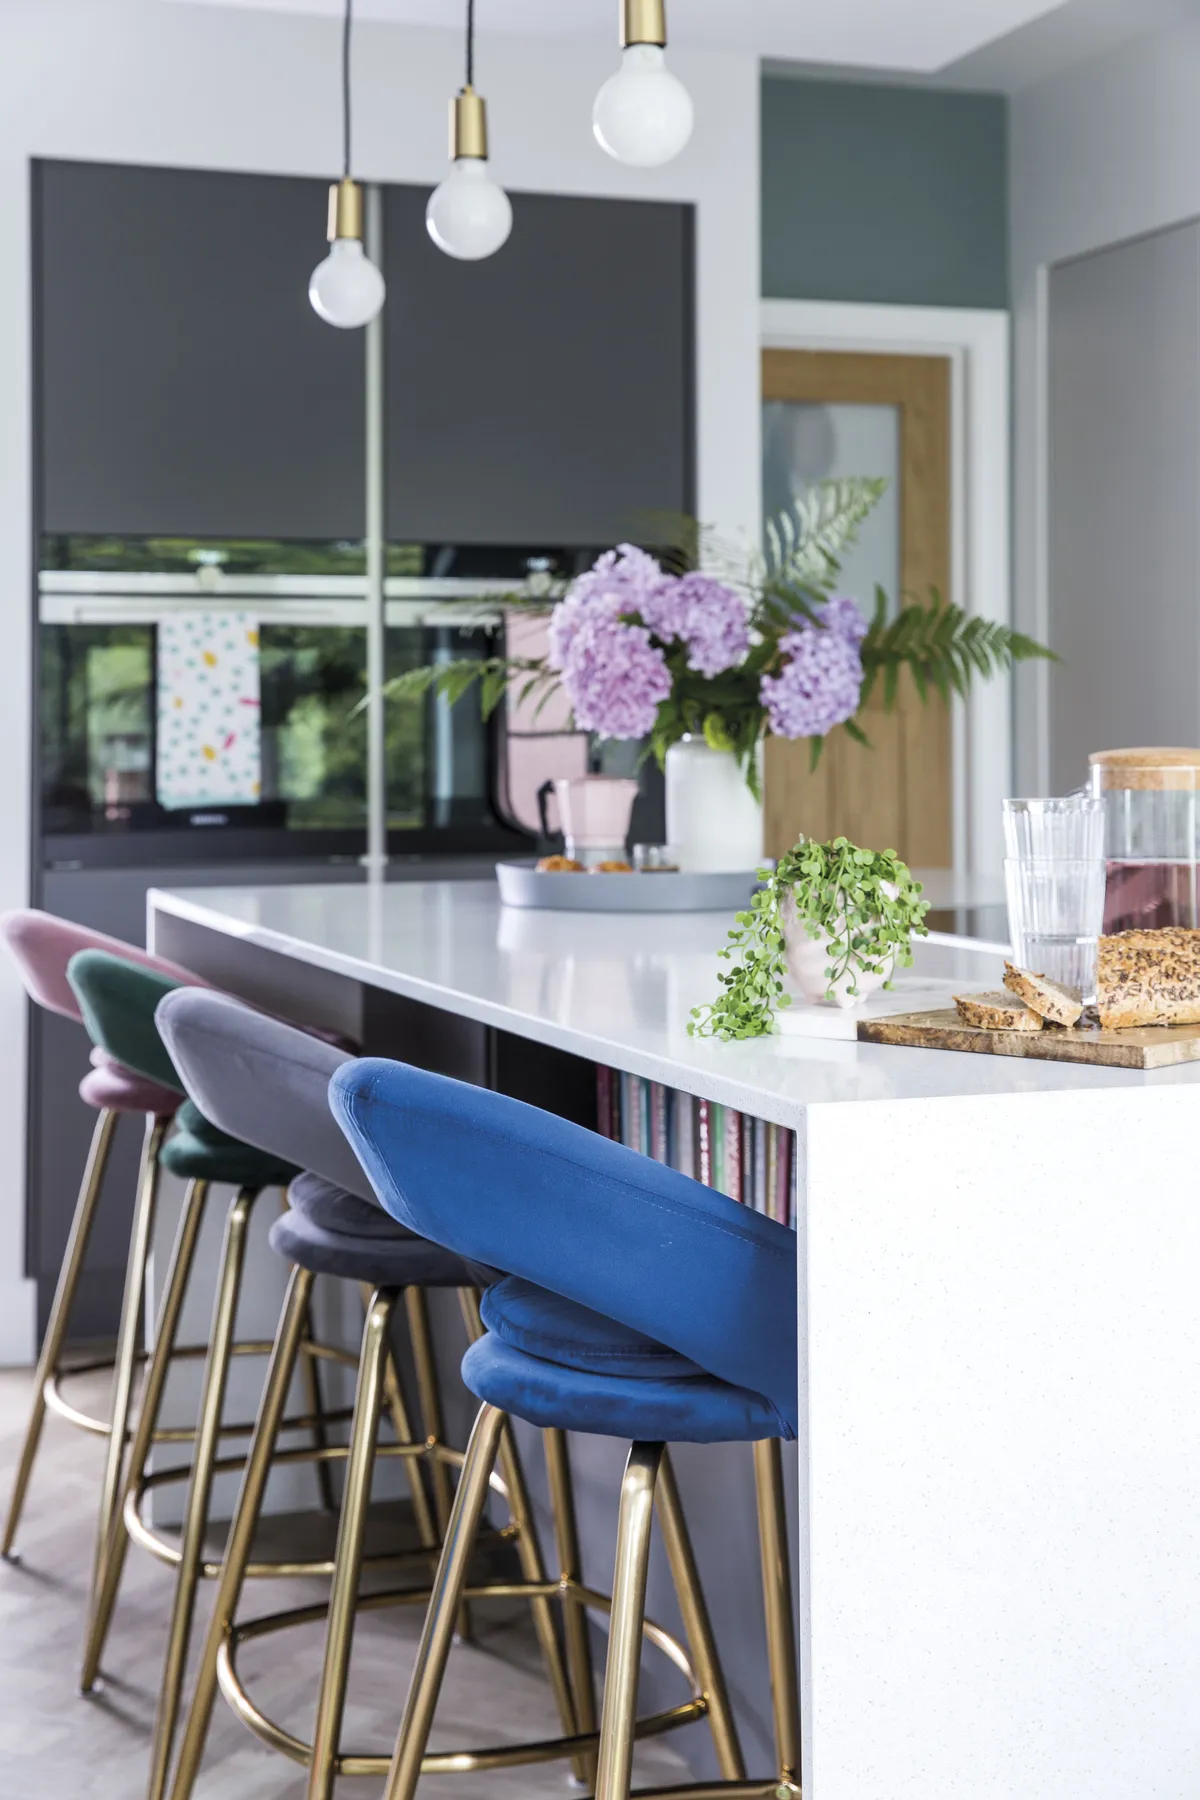 The breakfast bar area is a much-used part of the kitchen now and the kids love the velvet stools that Rebecca bought in different pastel shades